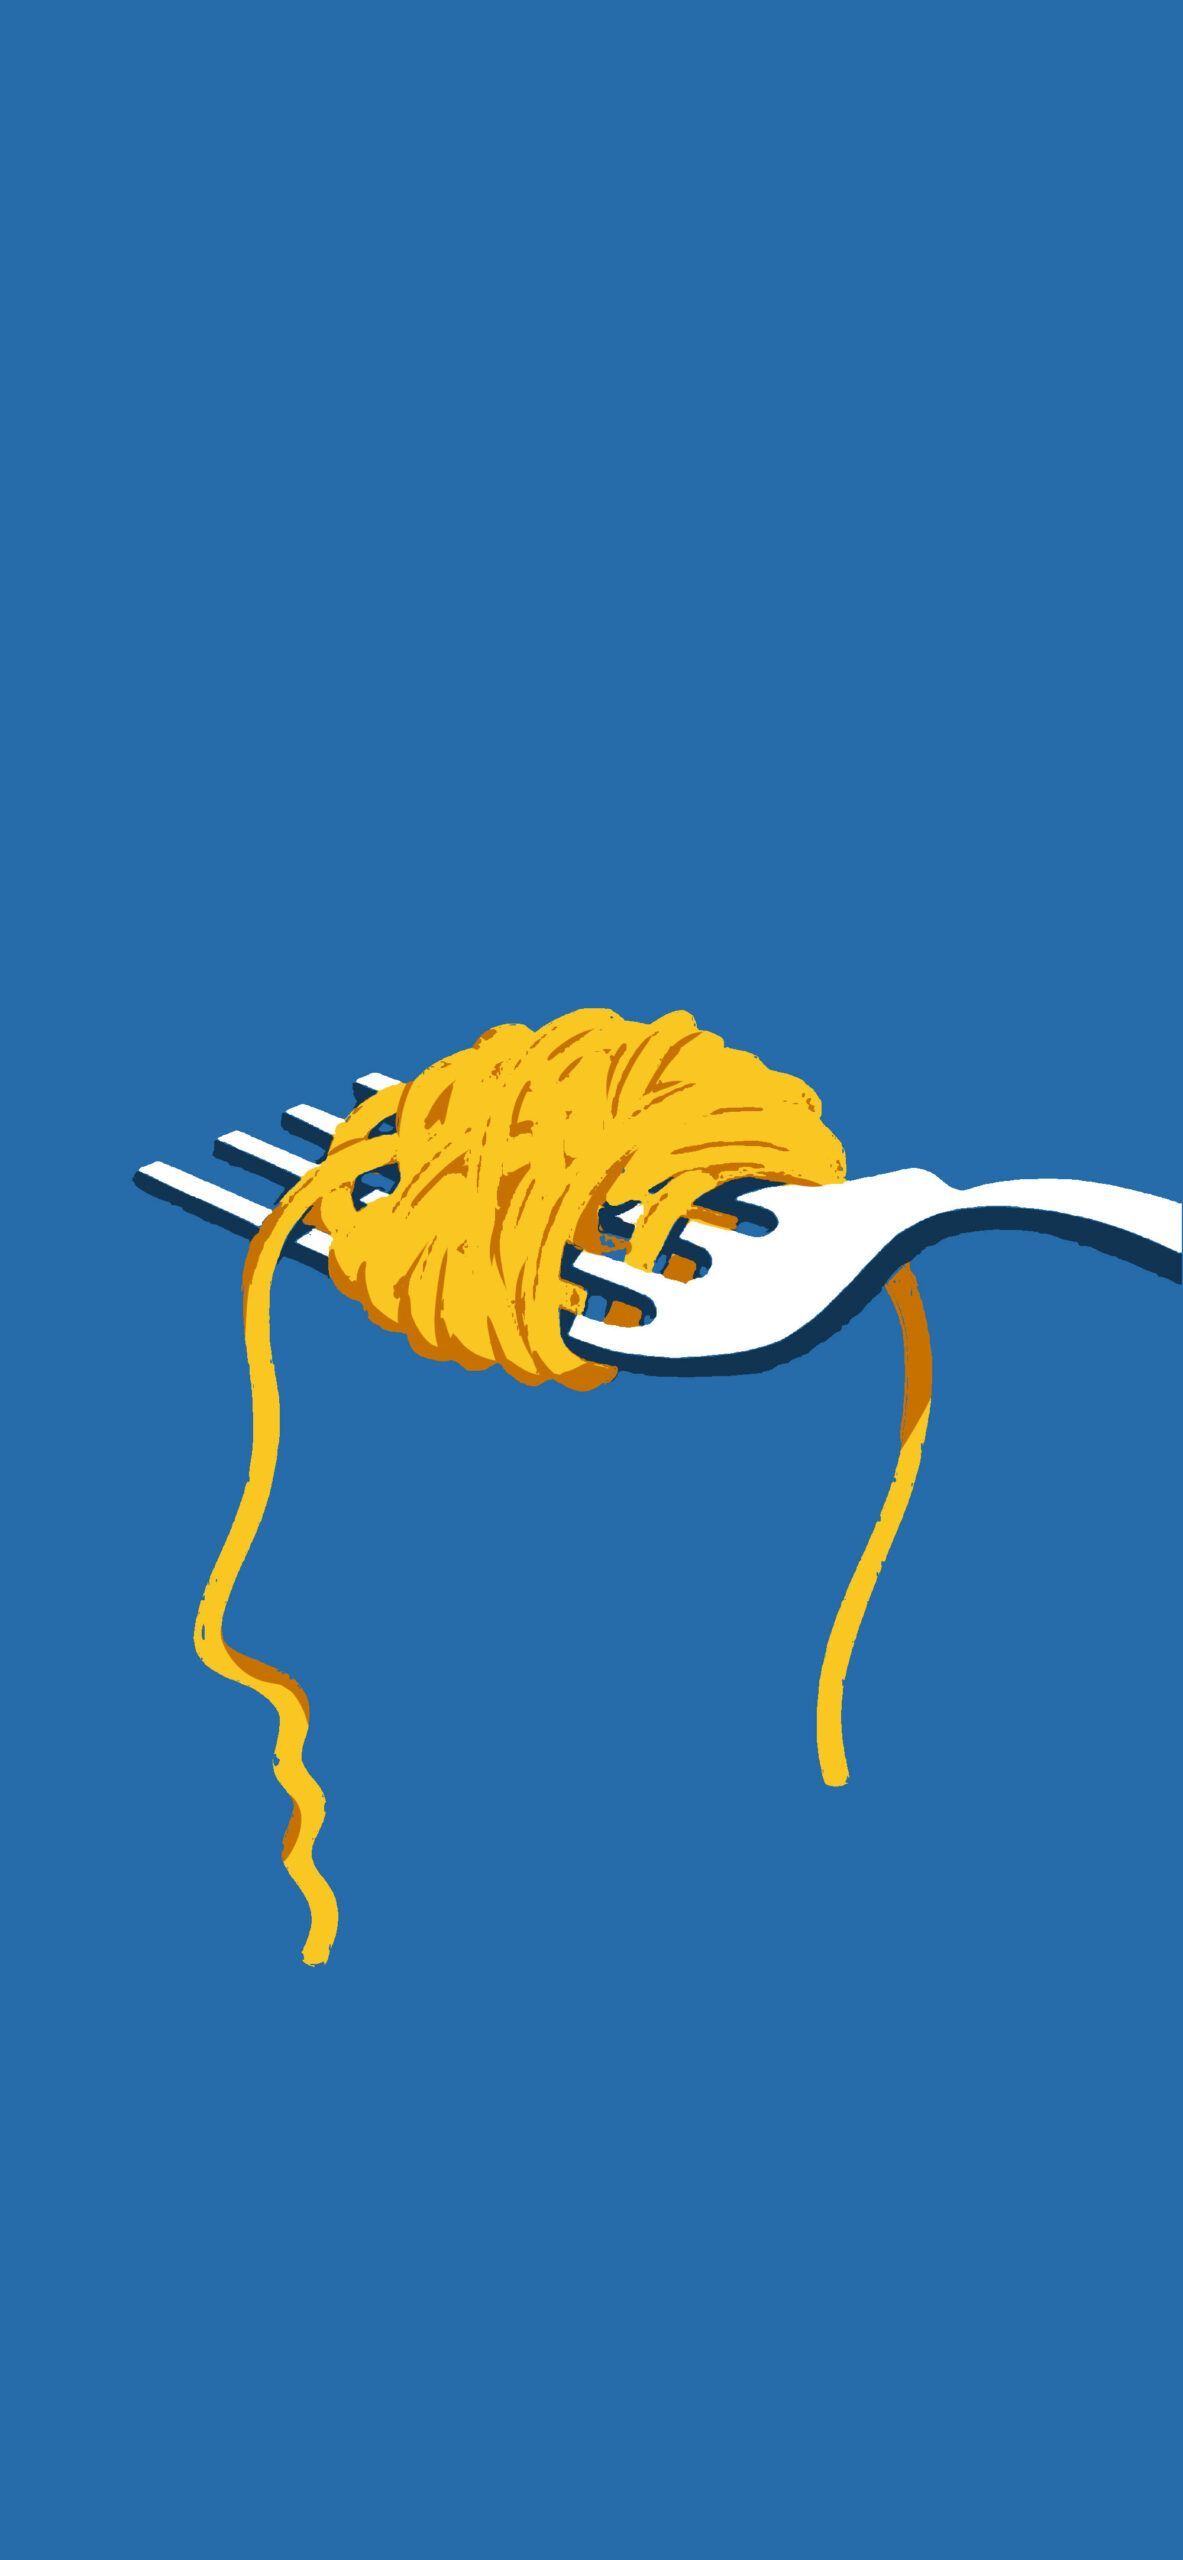 A fork with spaghetti on it is shown - Blue, pasta, art